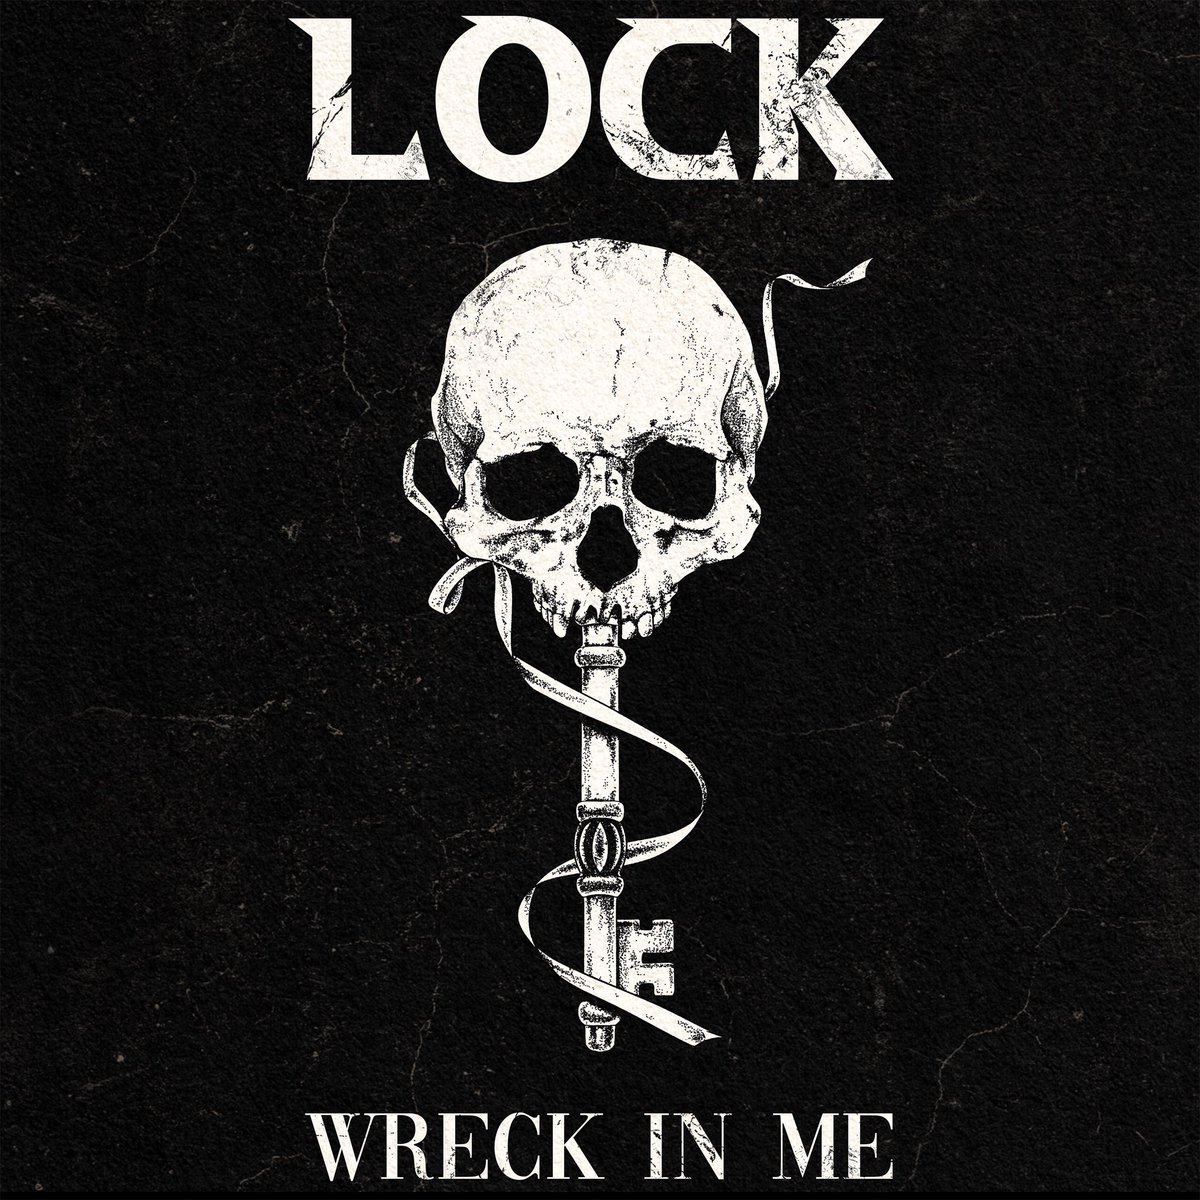 Our Brother @LOCKMULLOZ Has Got A New Single Coming Out On The 18th Of August! (18/8) 🔒💀🗝️ Pre-save Link Is In His Bio! . . . . . #artist #music #musicartist #musician #musicindustry #musicislife #musicismylife #musiclife #musicproducer #musicproduction #musicpromotion